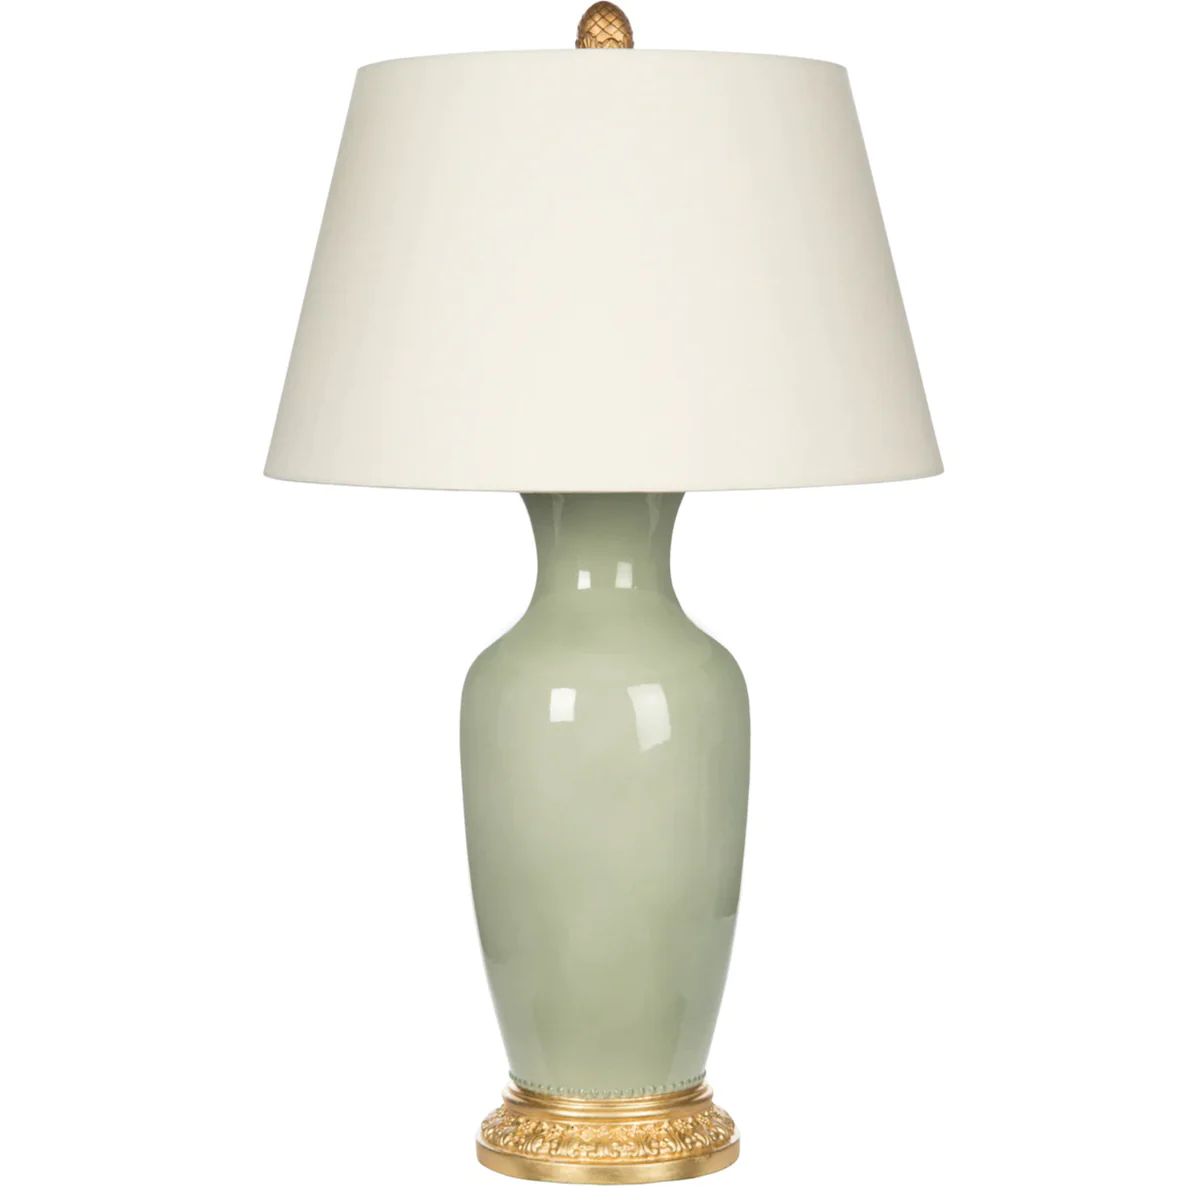 Aventine Verde Celadon Green Ceramic Table Lamp with Shade | The Well Appointed House, LLC